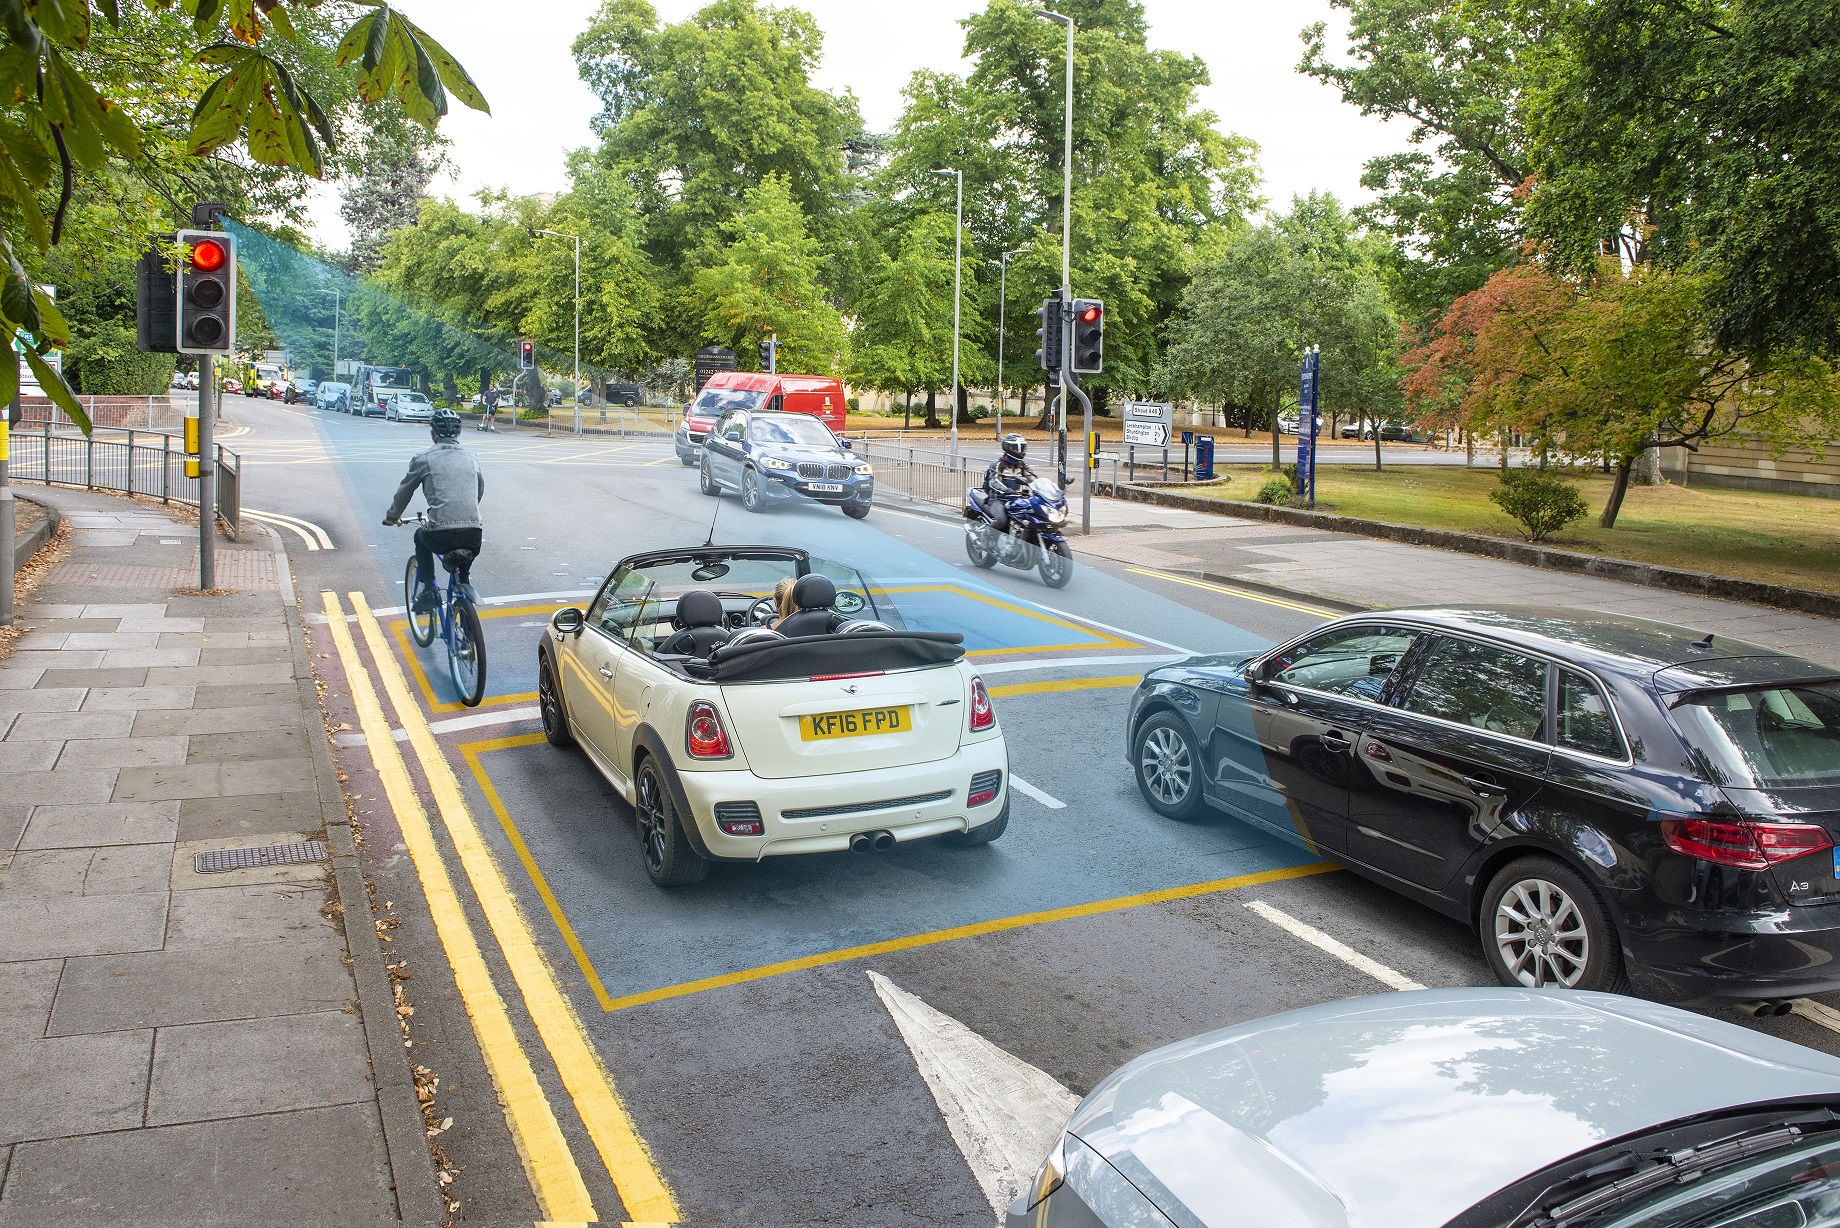 Detection monitoring vulnerable road users (image: AGD Systems)